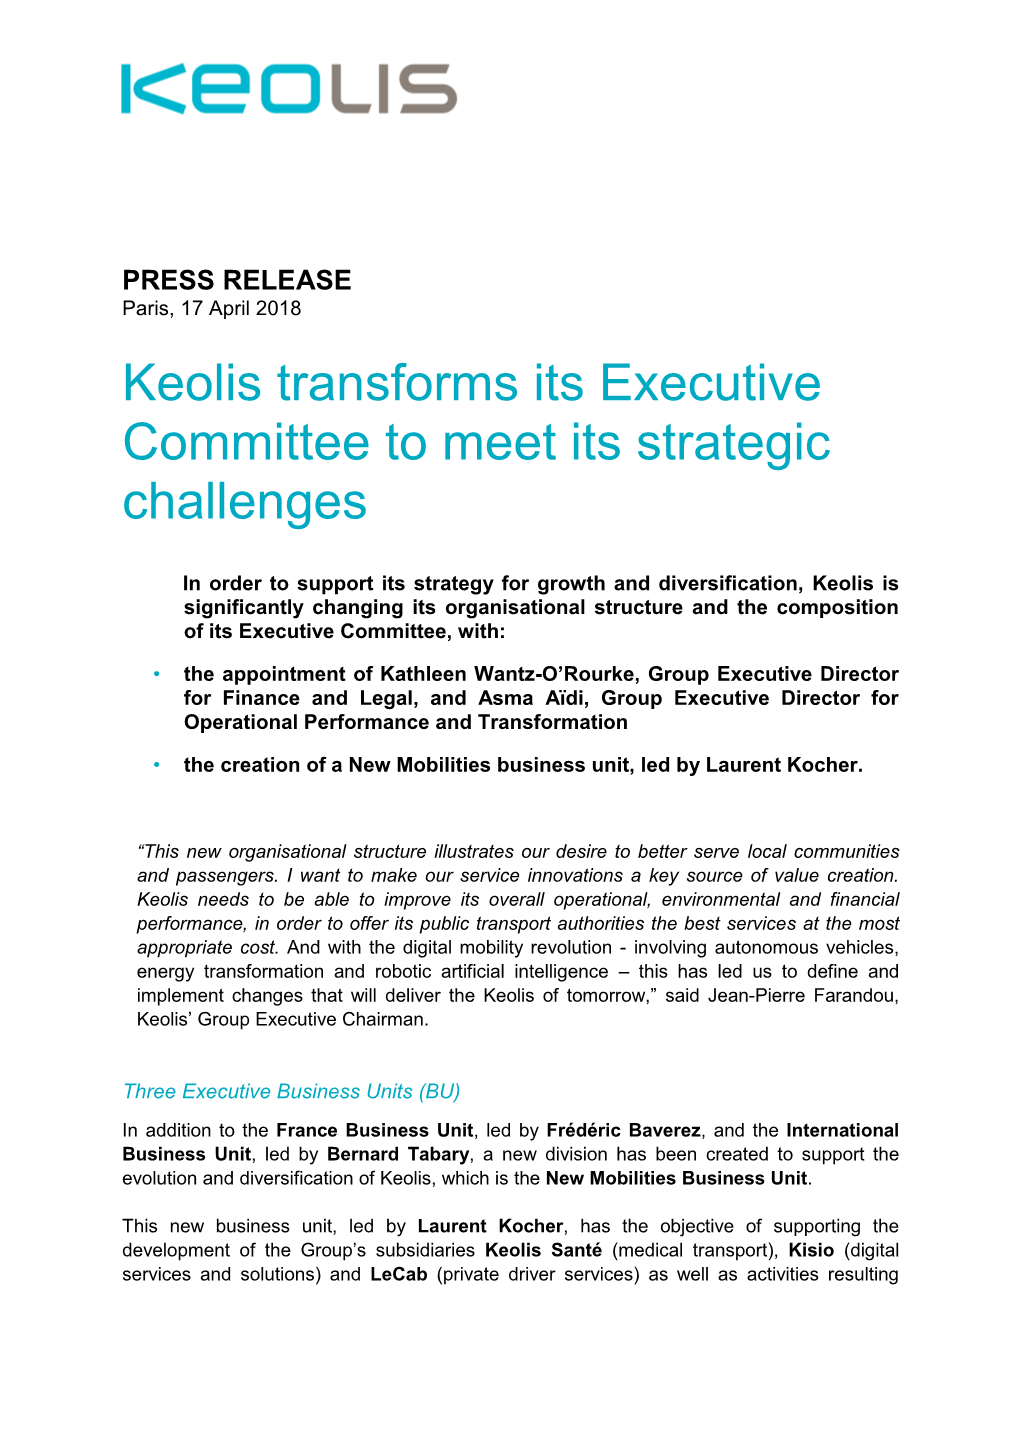 Keolis Transforms Its Executive Committee to Meet Its Strategic Challenges